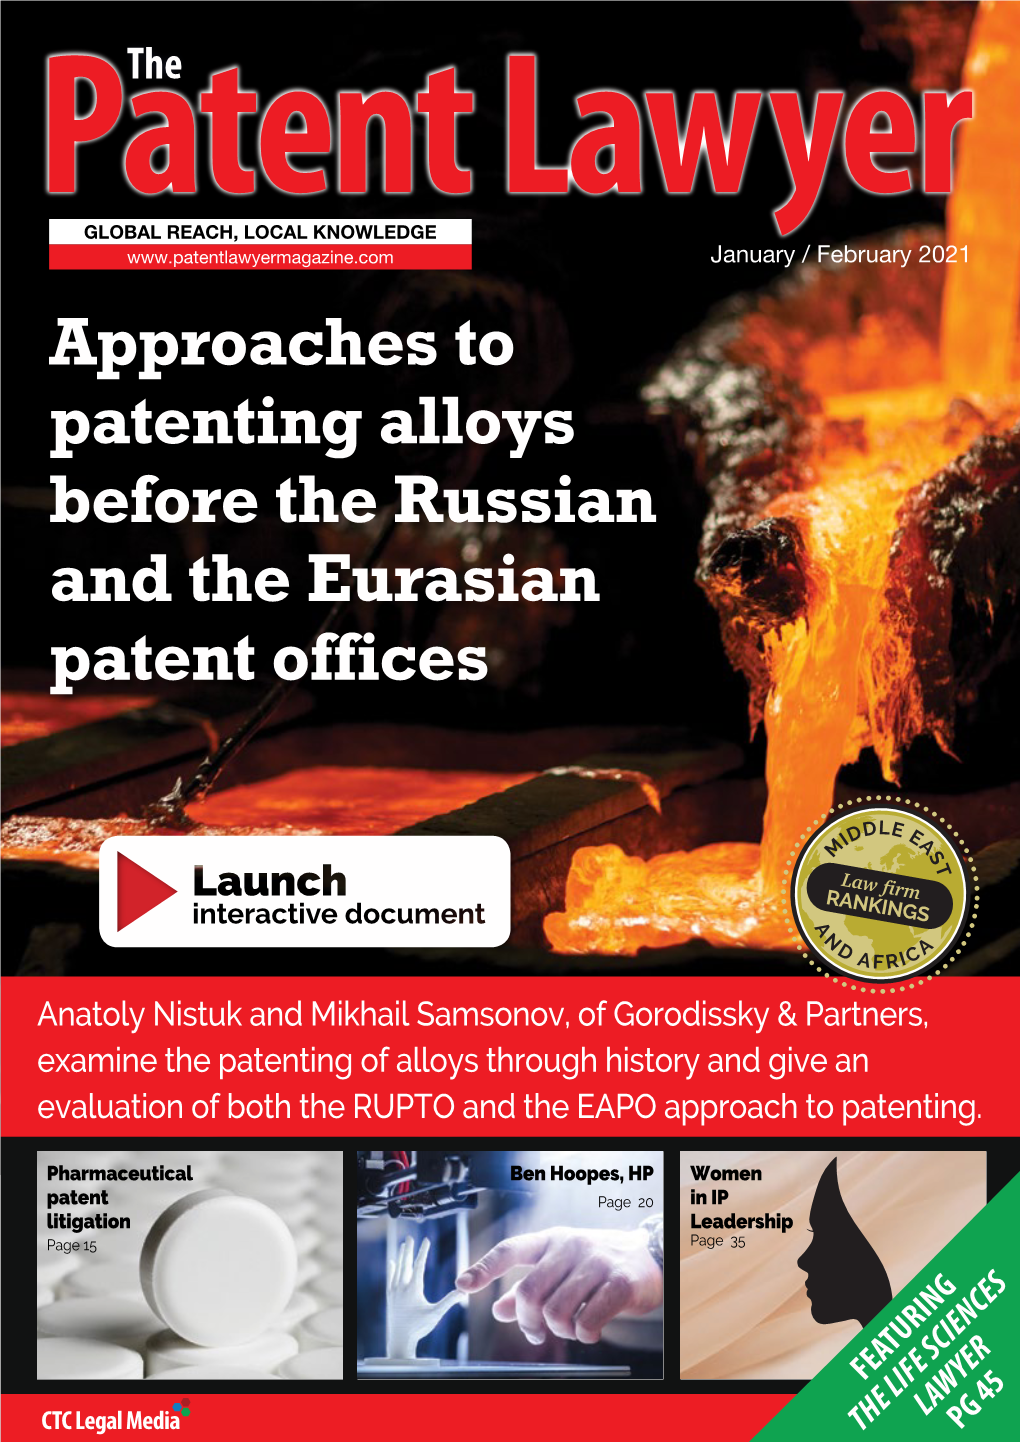 Approaches to Patenting Alloys Before the Russian and the Eurasian Patent Offices